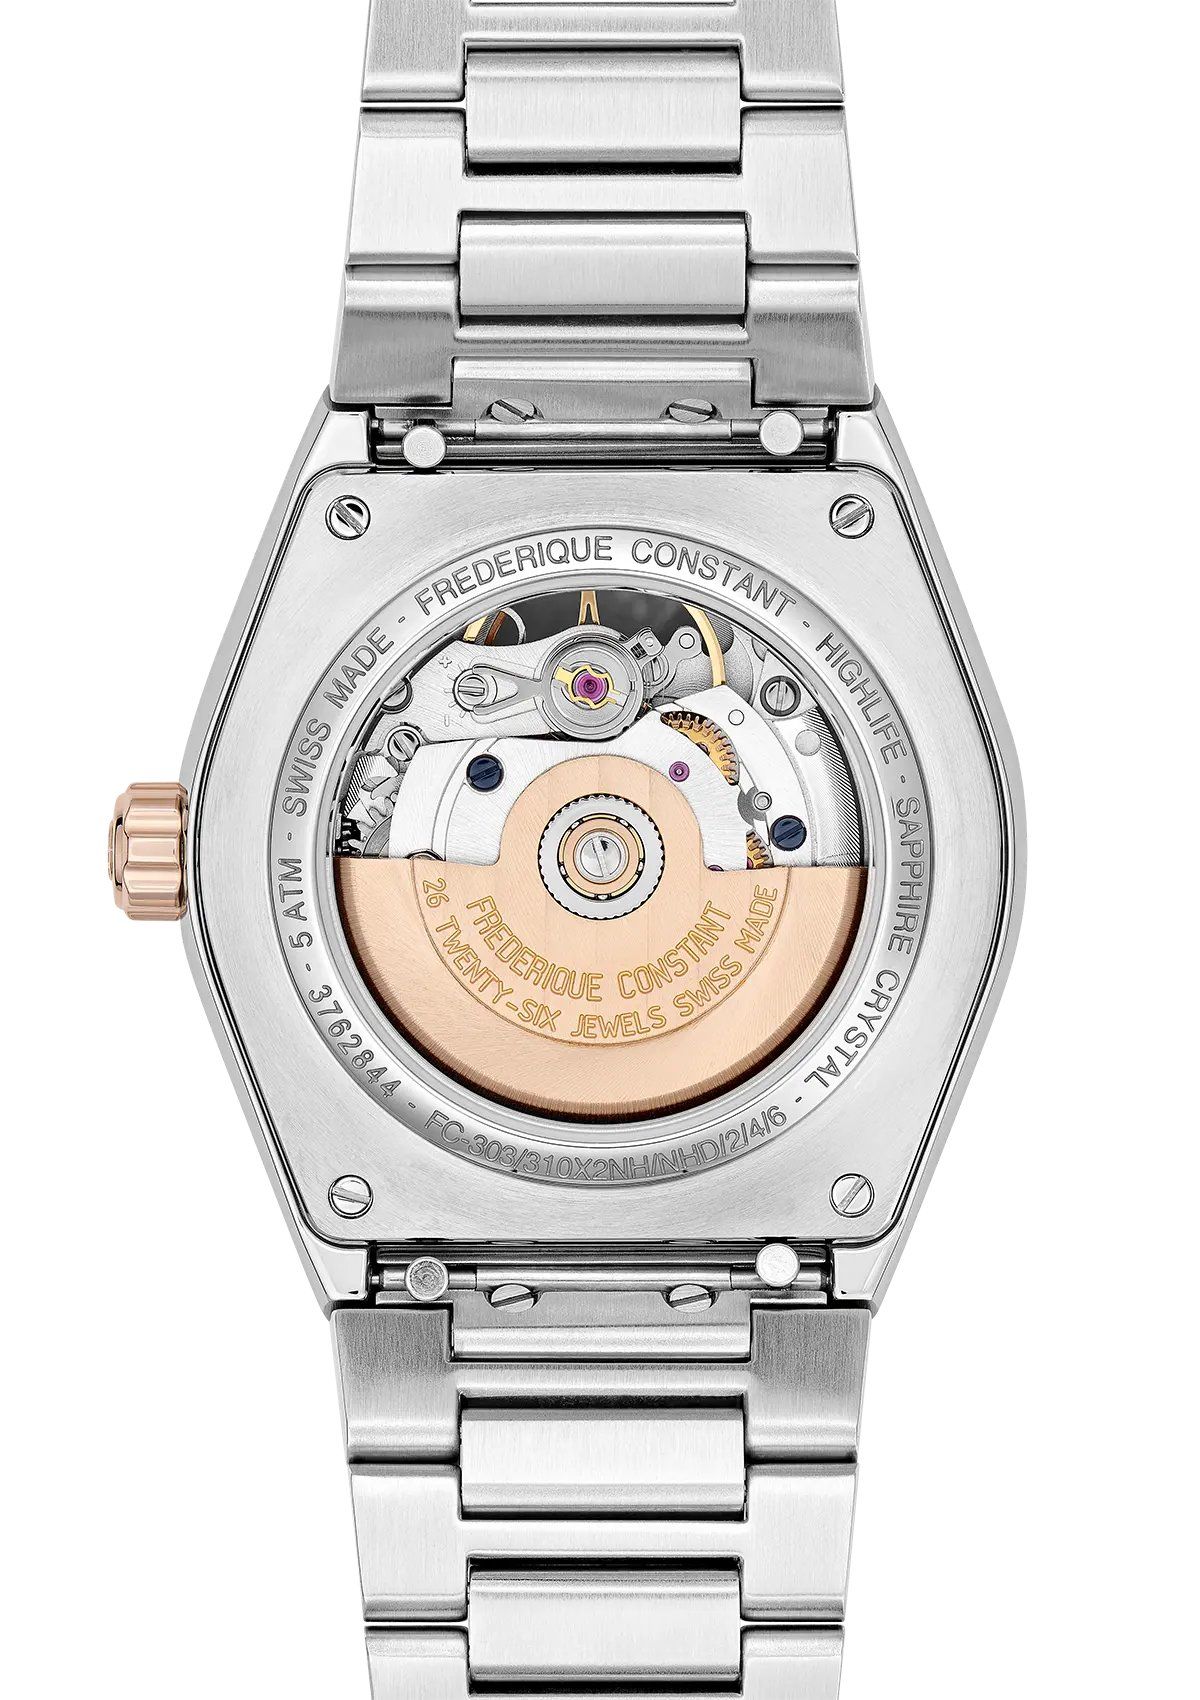 The automatic caliber powering the Highlife Ladies Automatic Heart Beat watch